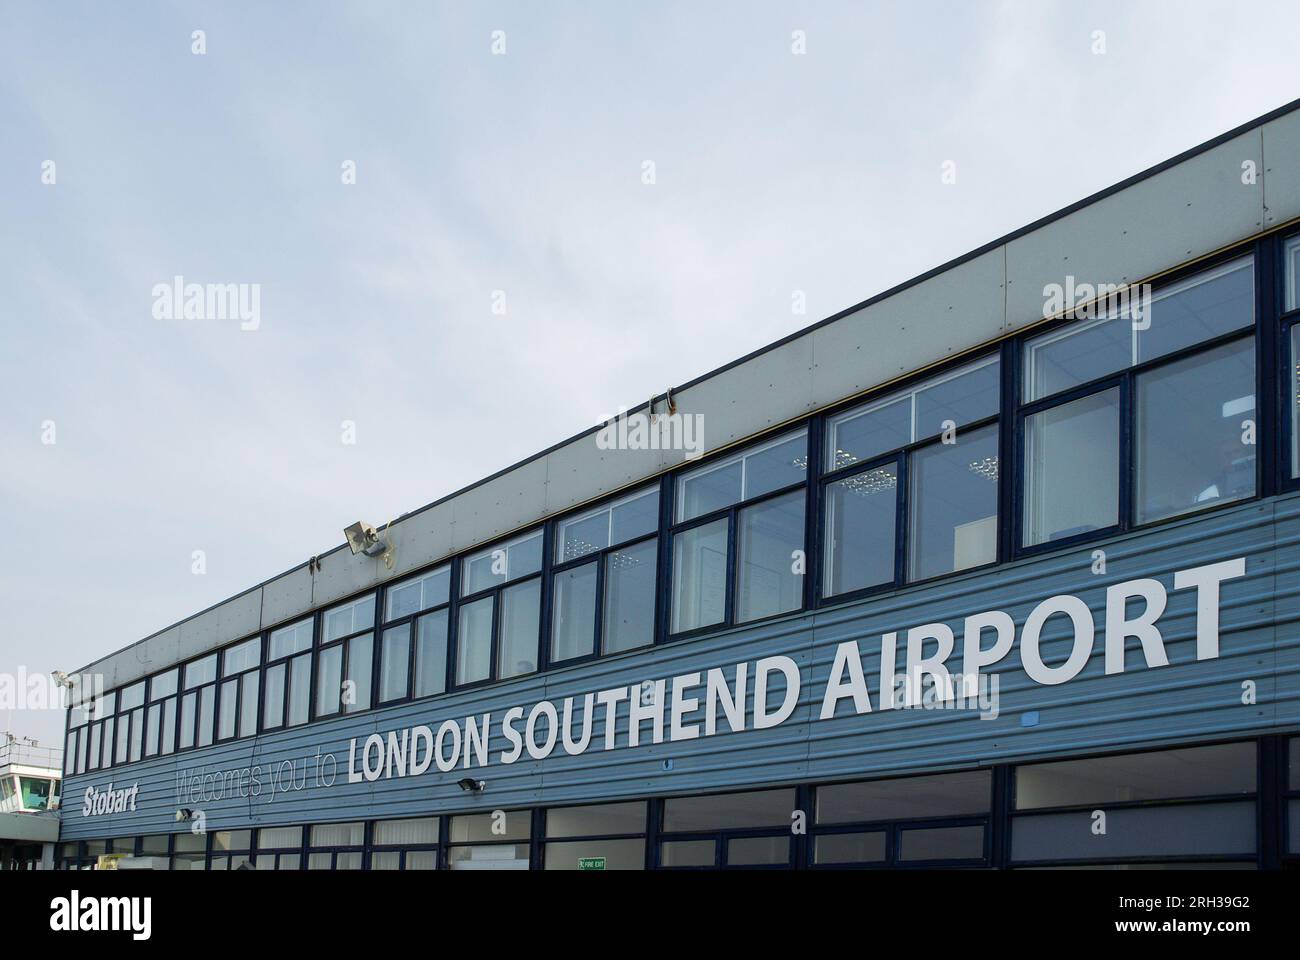 Stobart London Southend Airport terminal building, Southend on sea, Essex, UK. With text lettering, name of airport. Old terminal before expansion Stock Photo